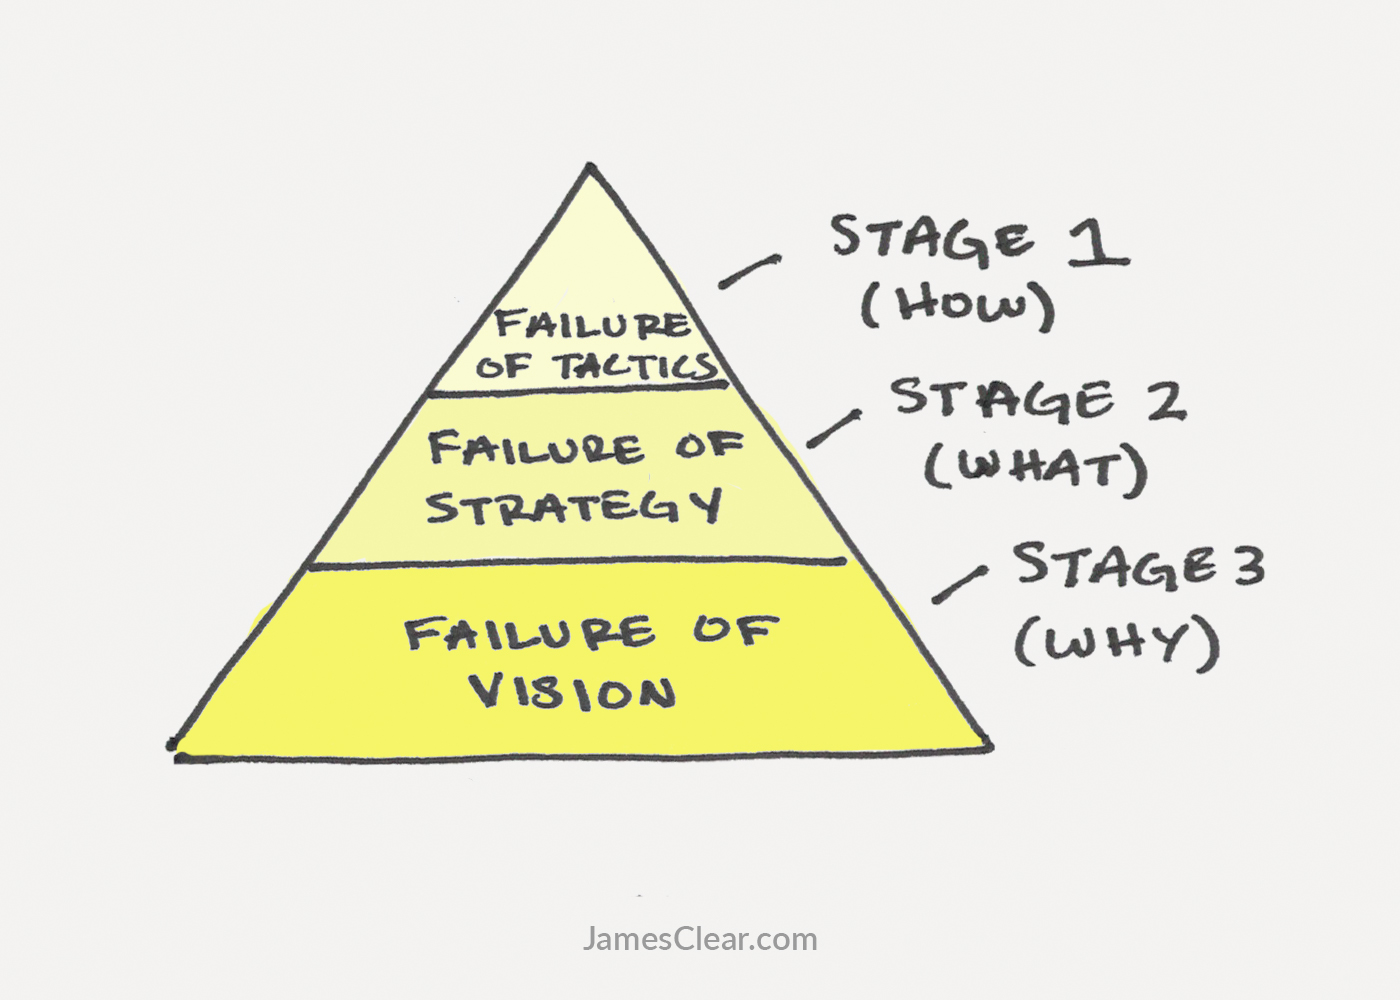 3 Stages of Failure explained